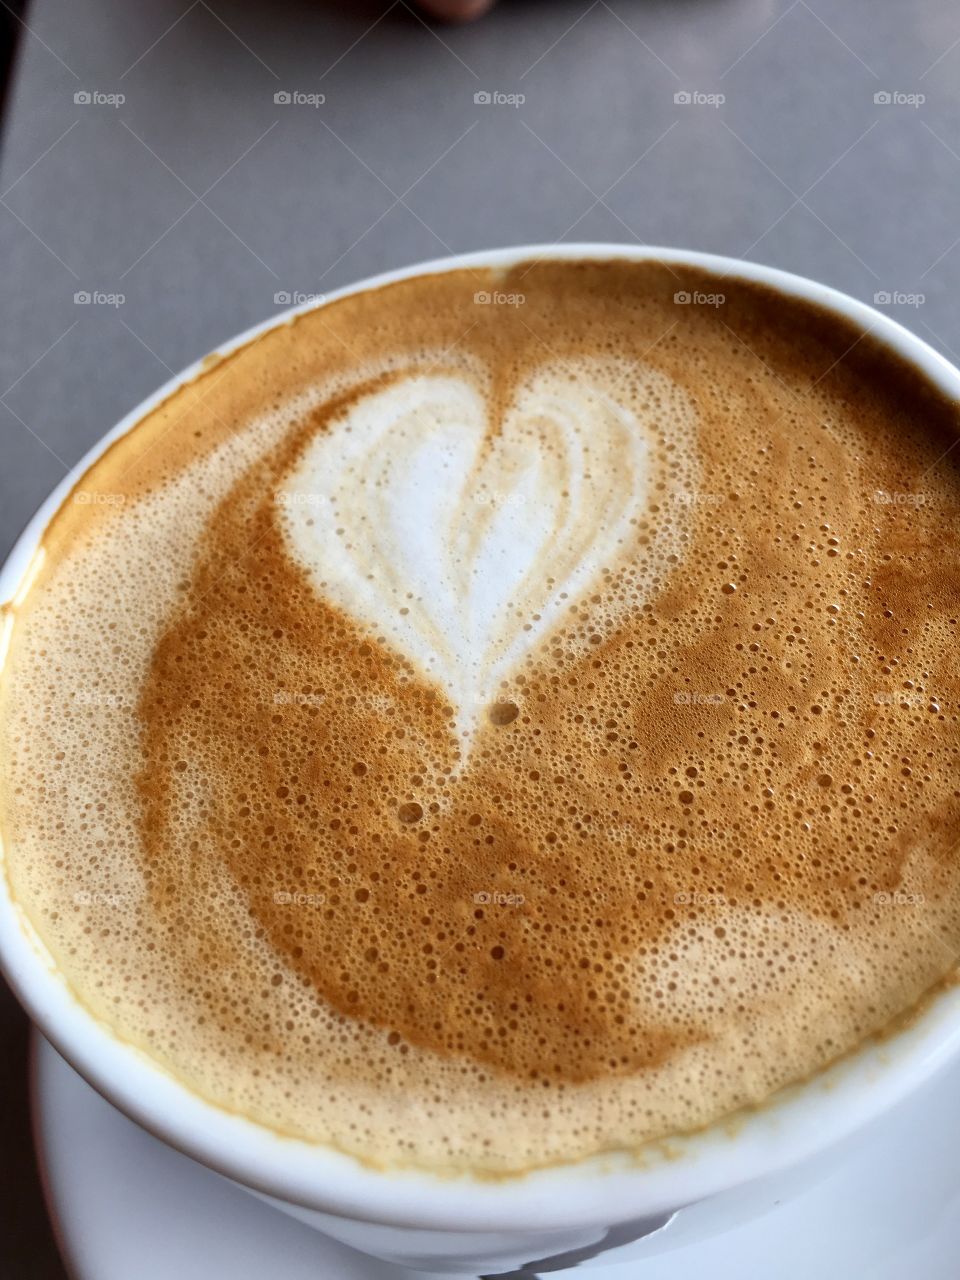 Romance in a coffee cup, heart shape in foam, Cafe latte, love, dating, relationships, 